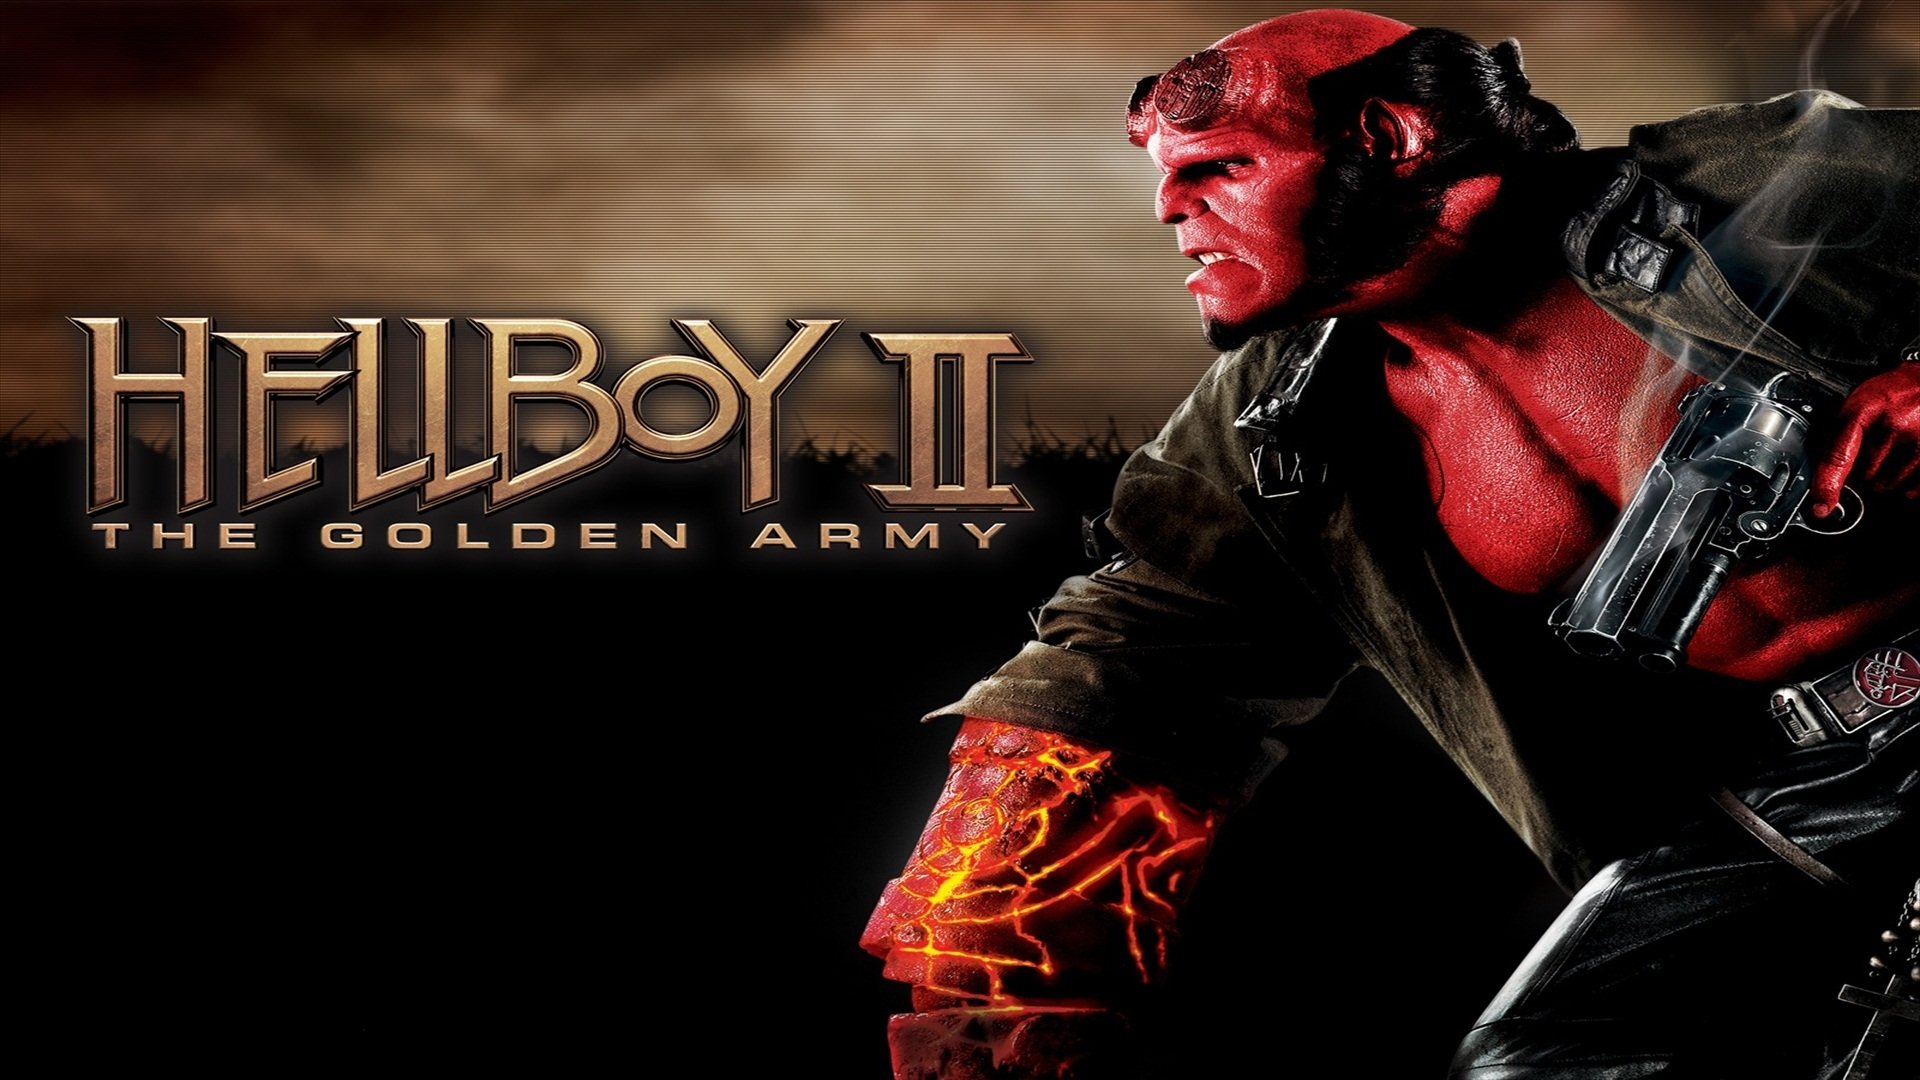 Hellboy II: The Golden Army Backgrounds, Compatible - PC, Mobile, Gadgets| 1920x1080 px